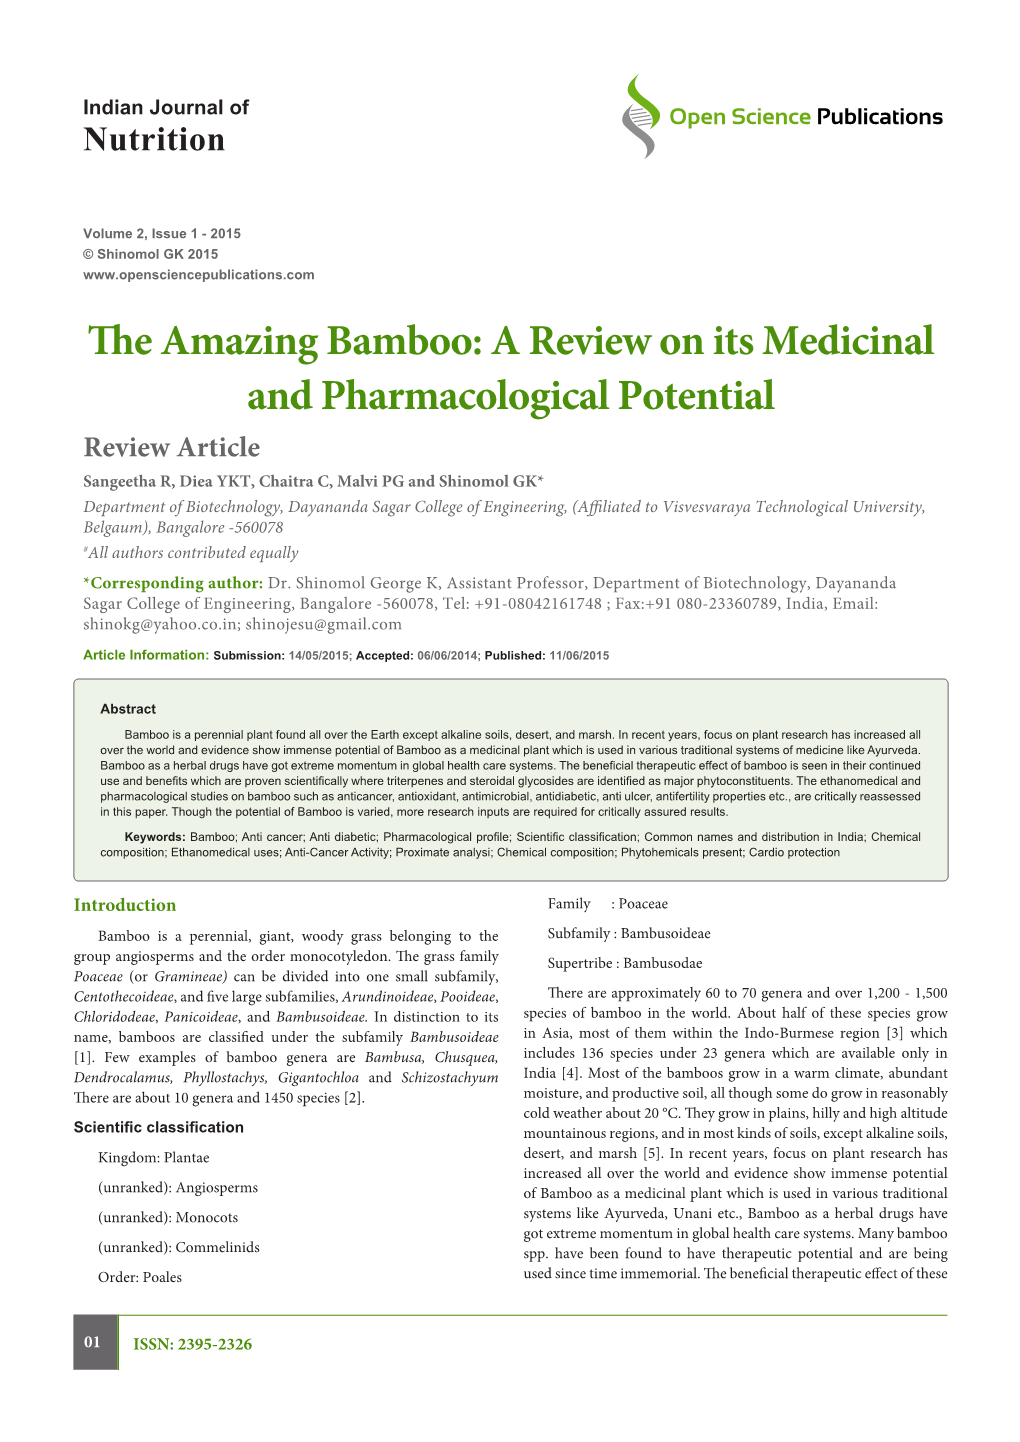 The Amazing Bamboo: a Review on Its Medicinal and Pharmacological